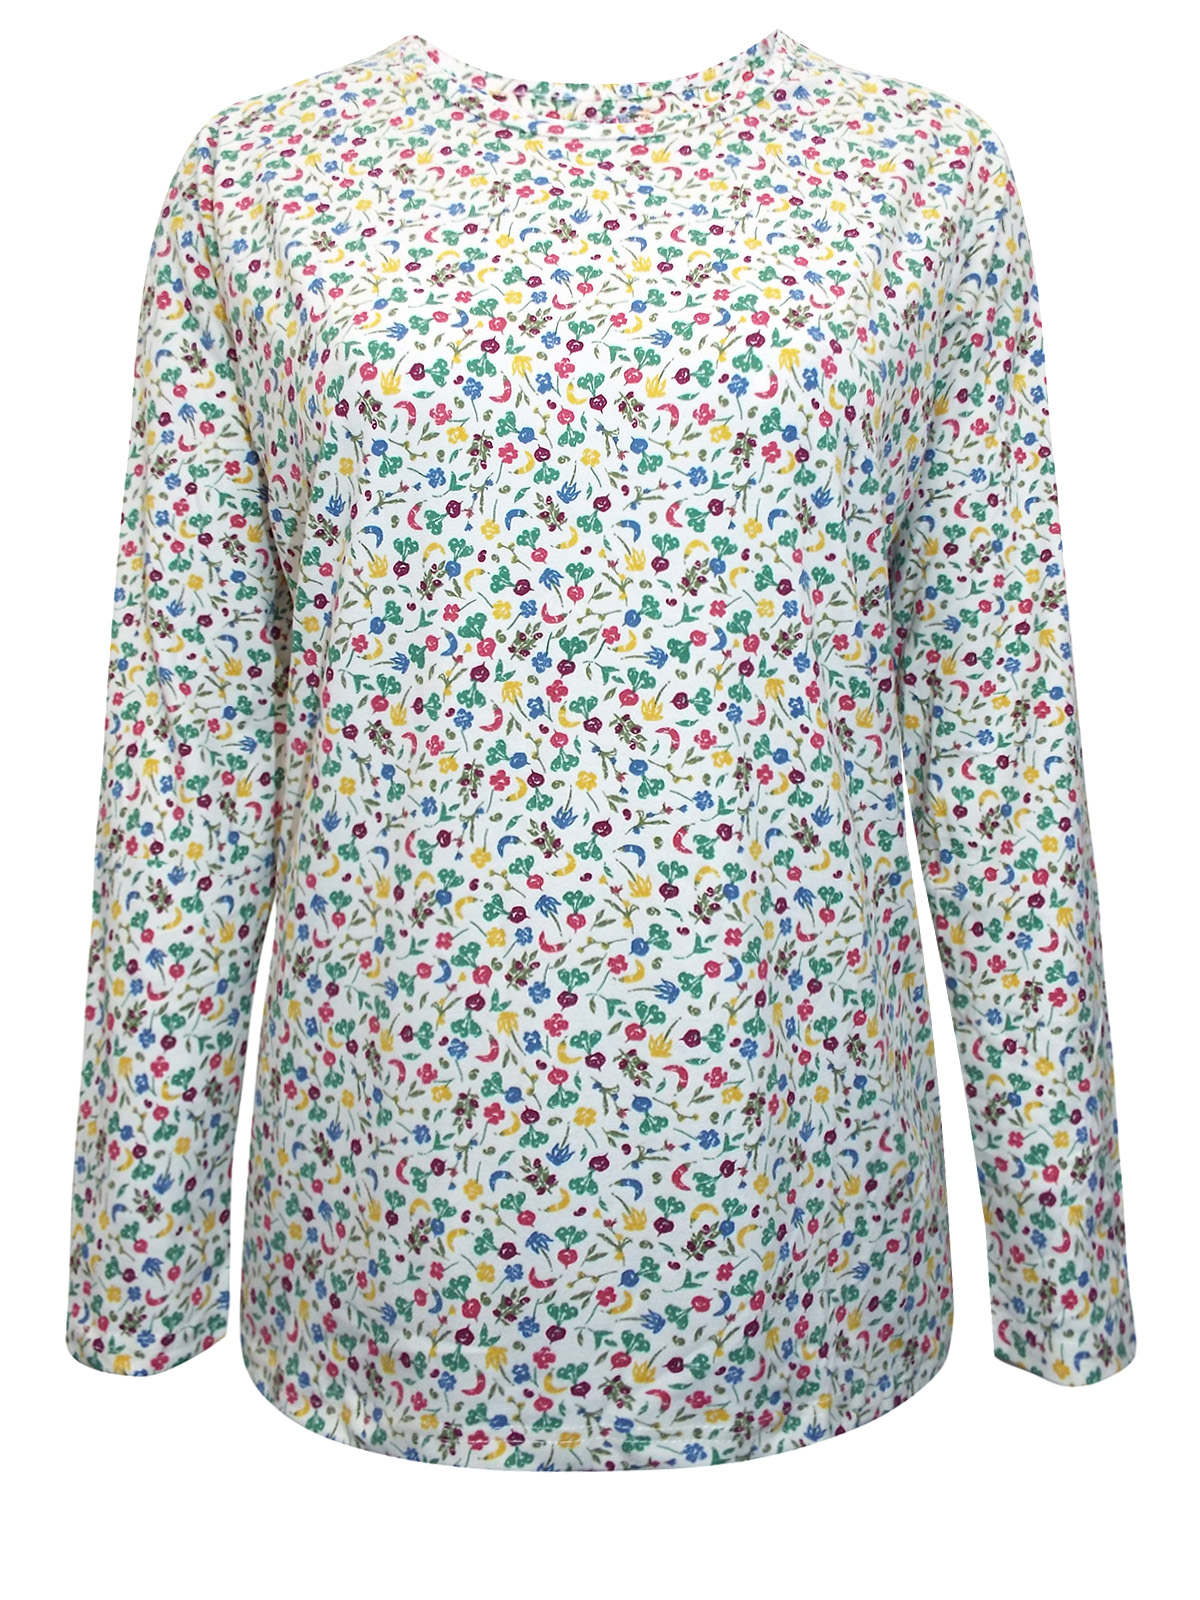 Country Rose - - Country Rose BLUE Floral Print Long Sleeve Thermal Top -  Size 10/12 to 22/24 (Sm